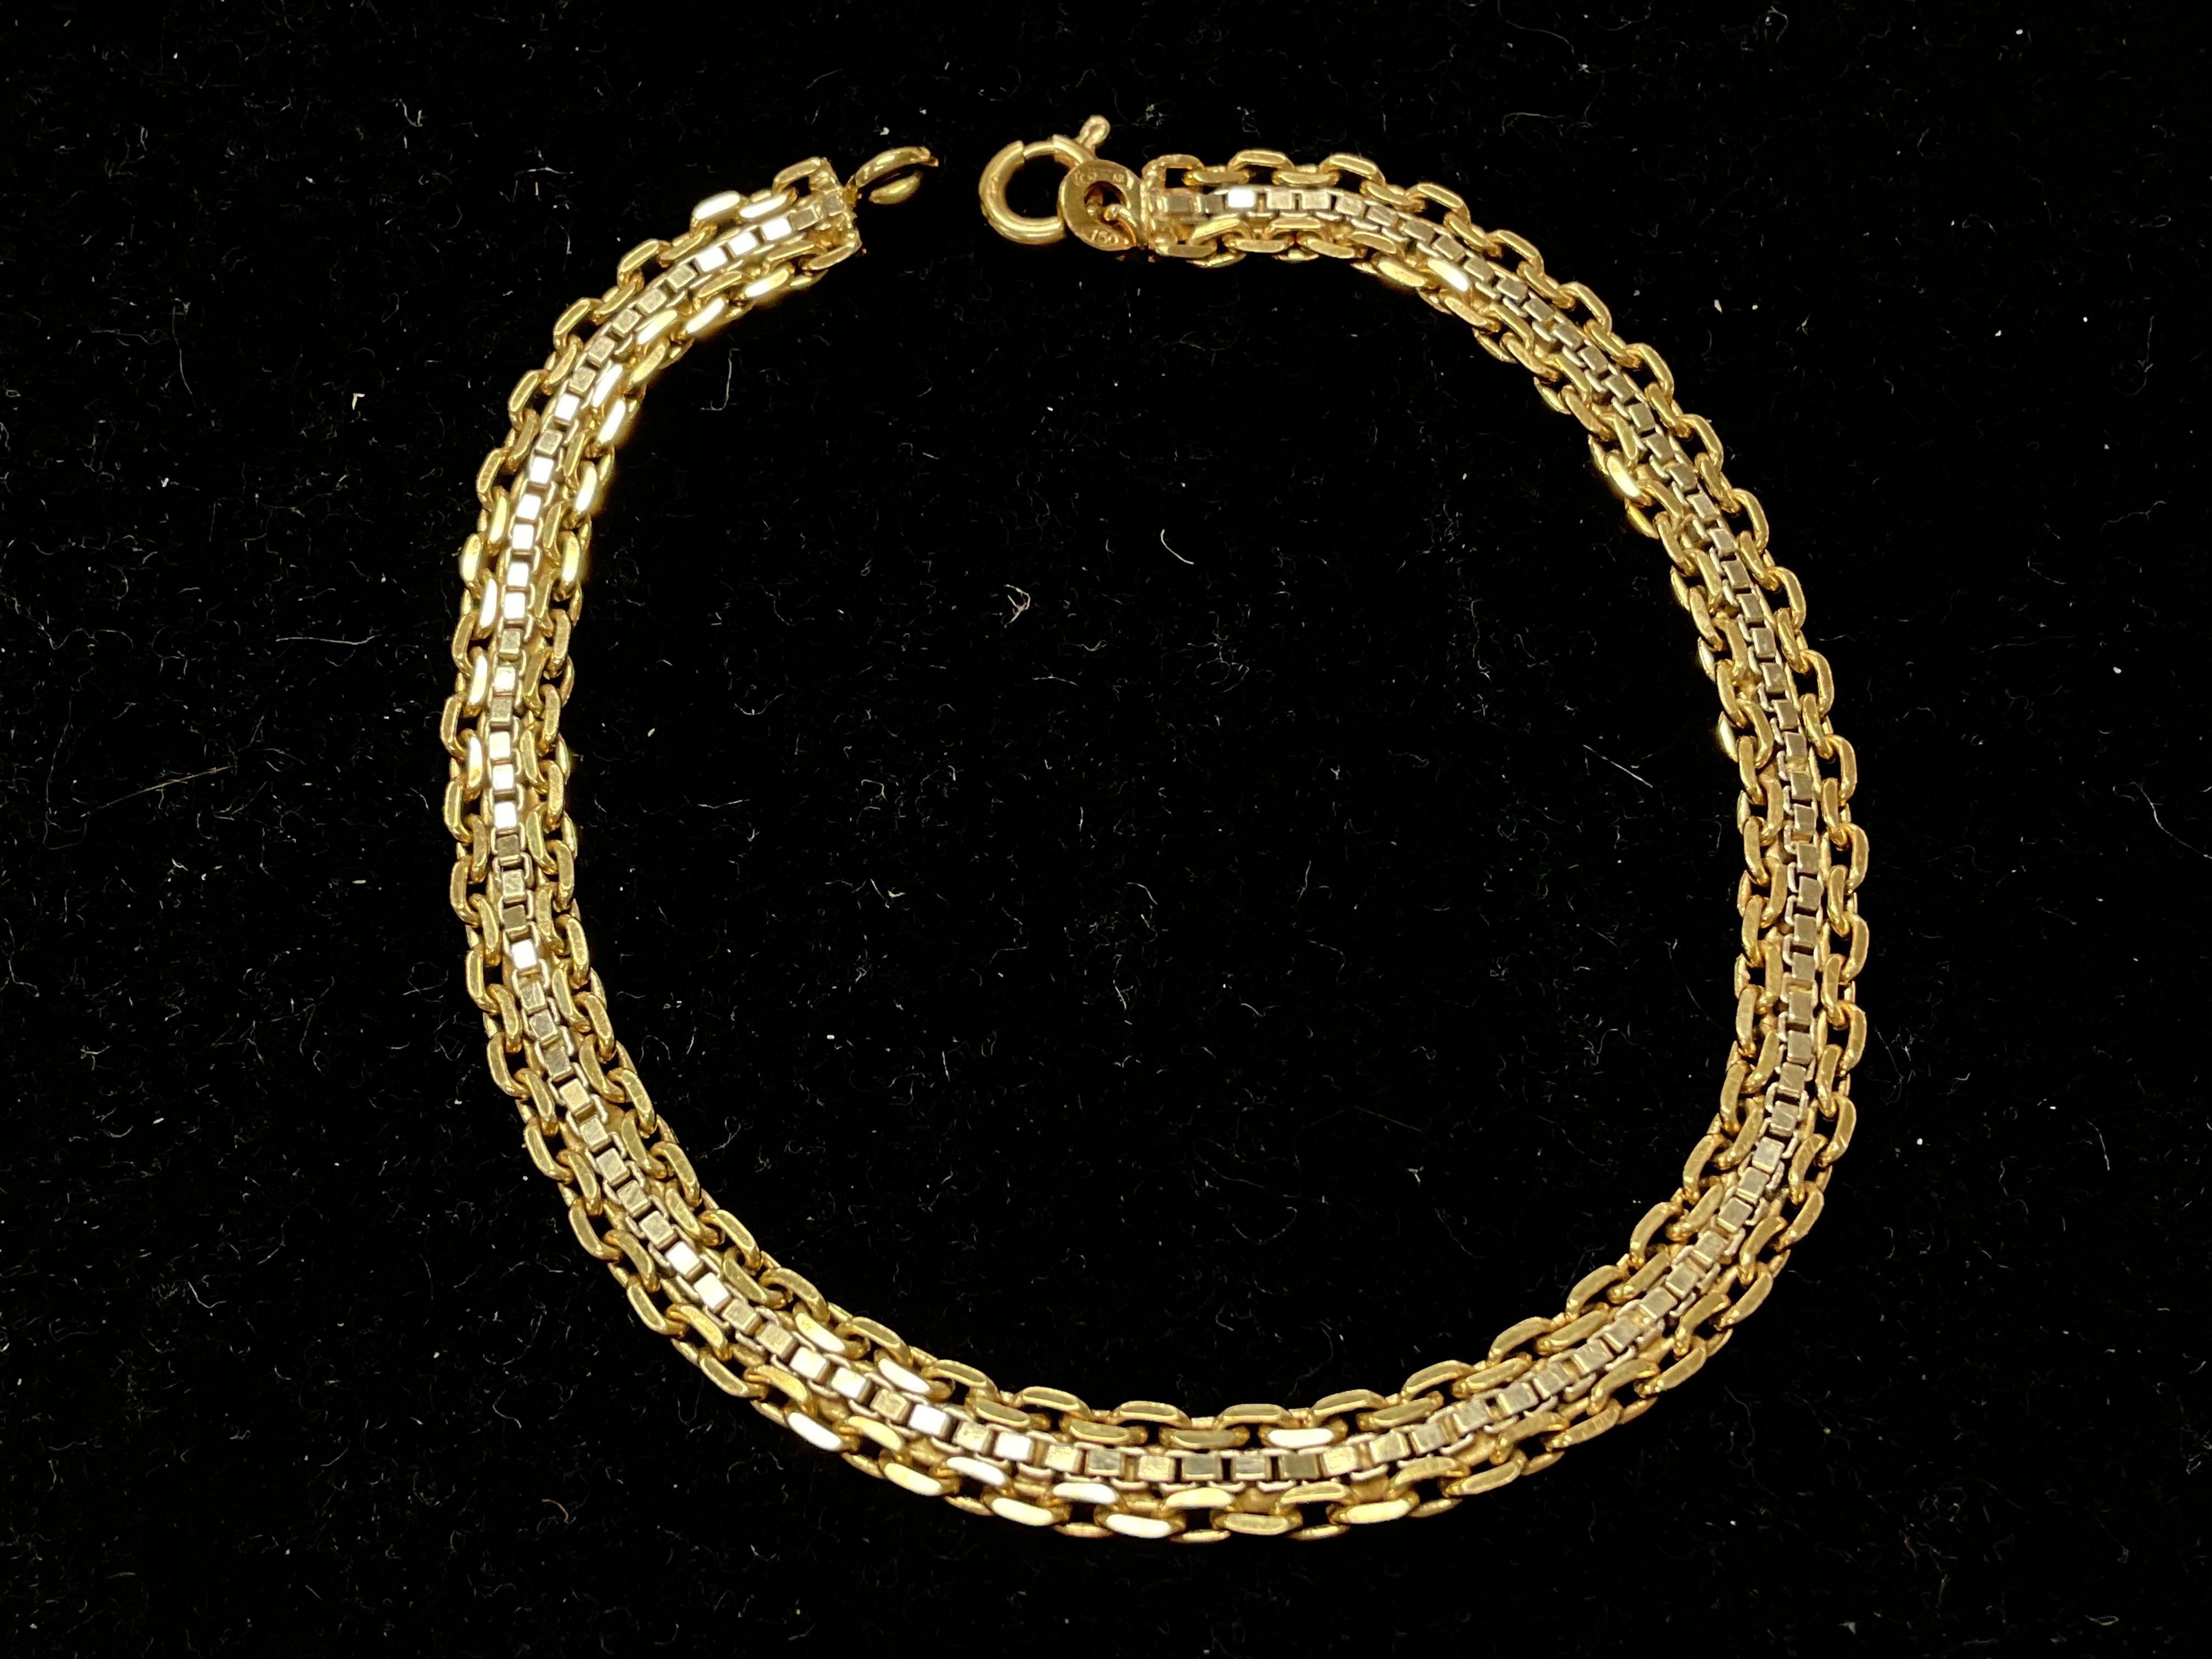 An 18ct gold link bracelet weighing approximately